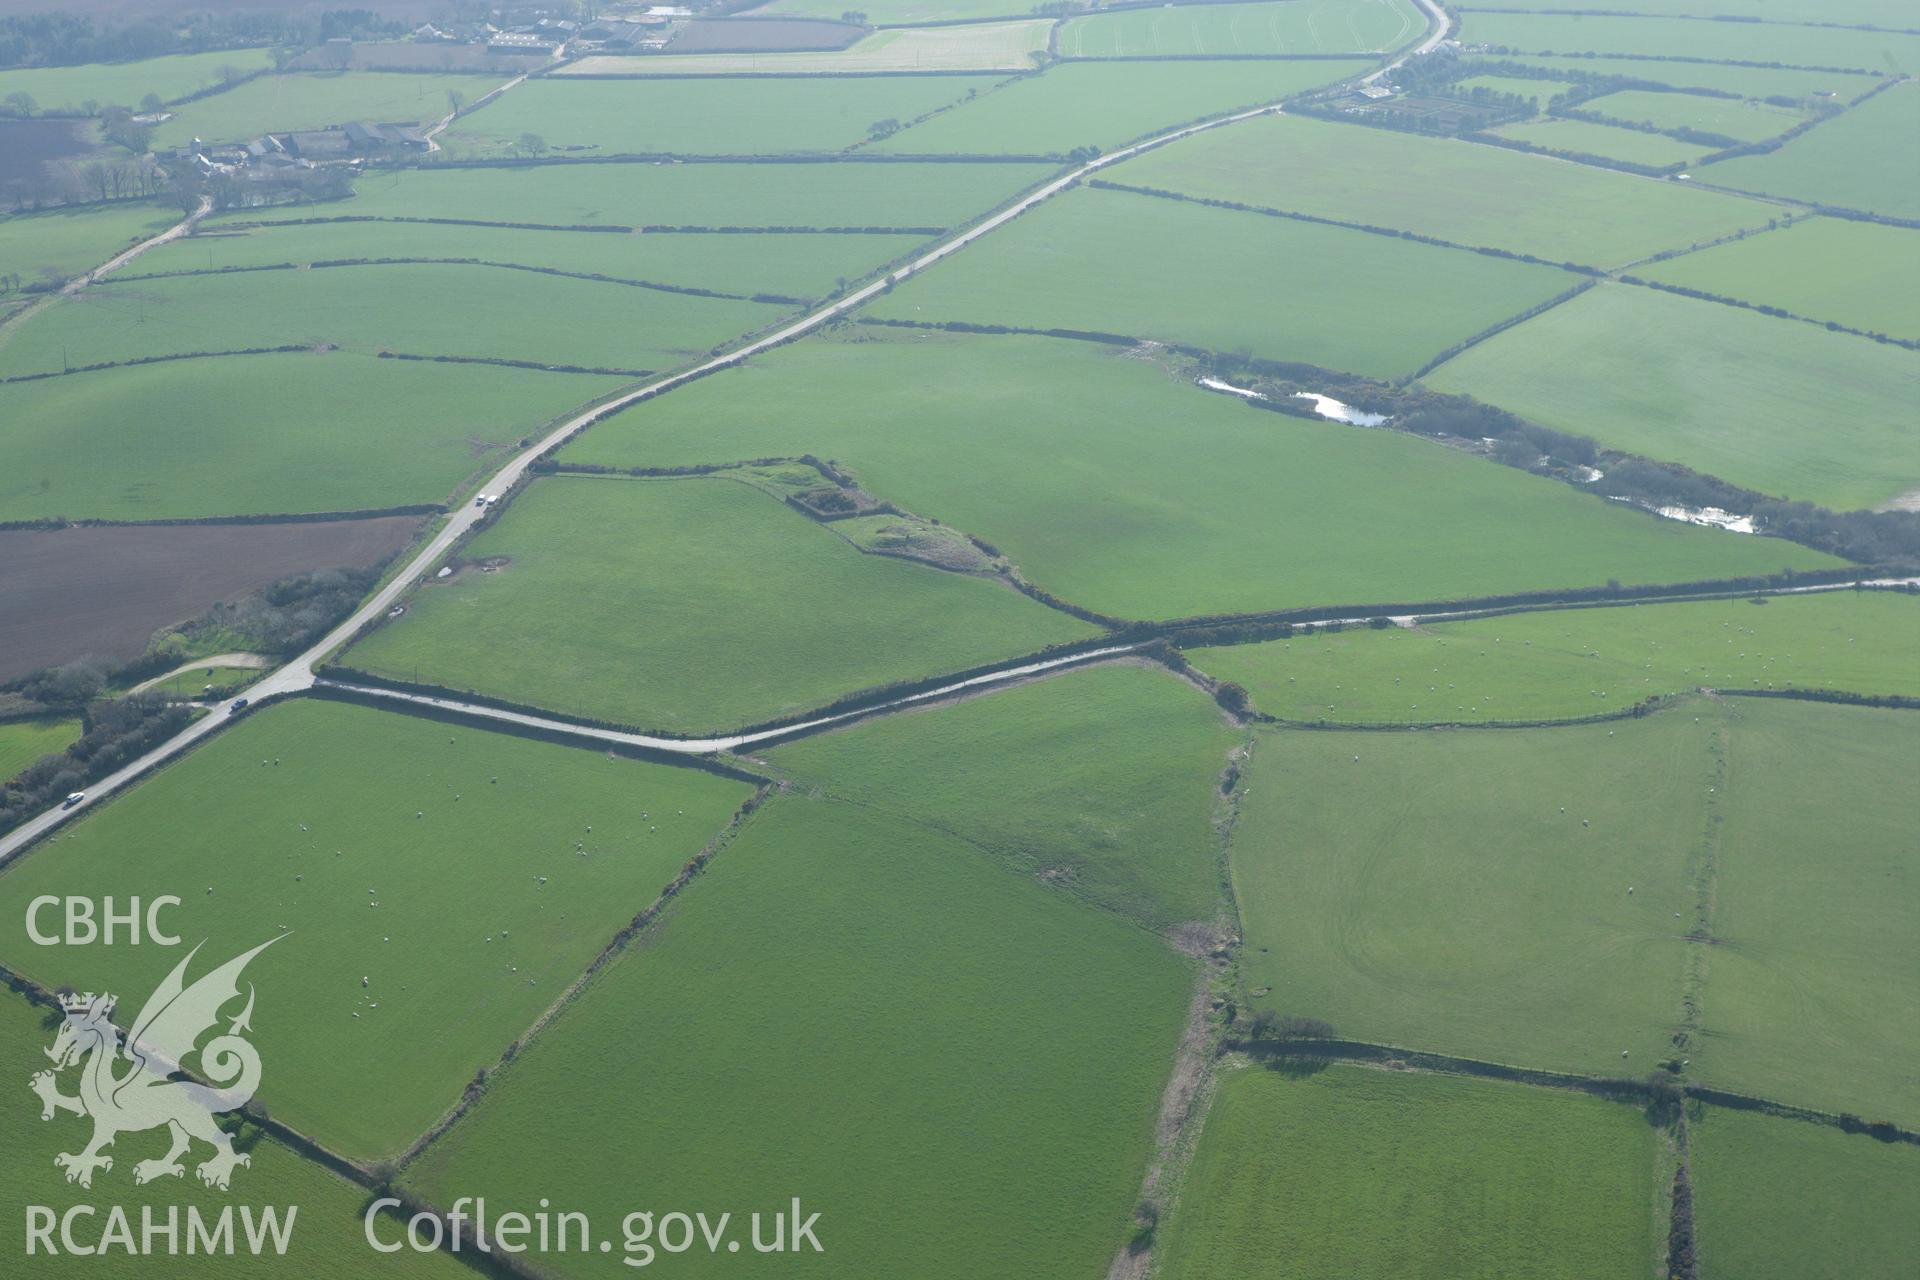 RCAHMW colour oblique aerial photograph of Crugiau Cemaes Barrow III. Taken on 13 April 2010 by Toby Driver